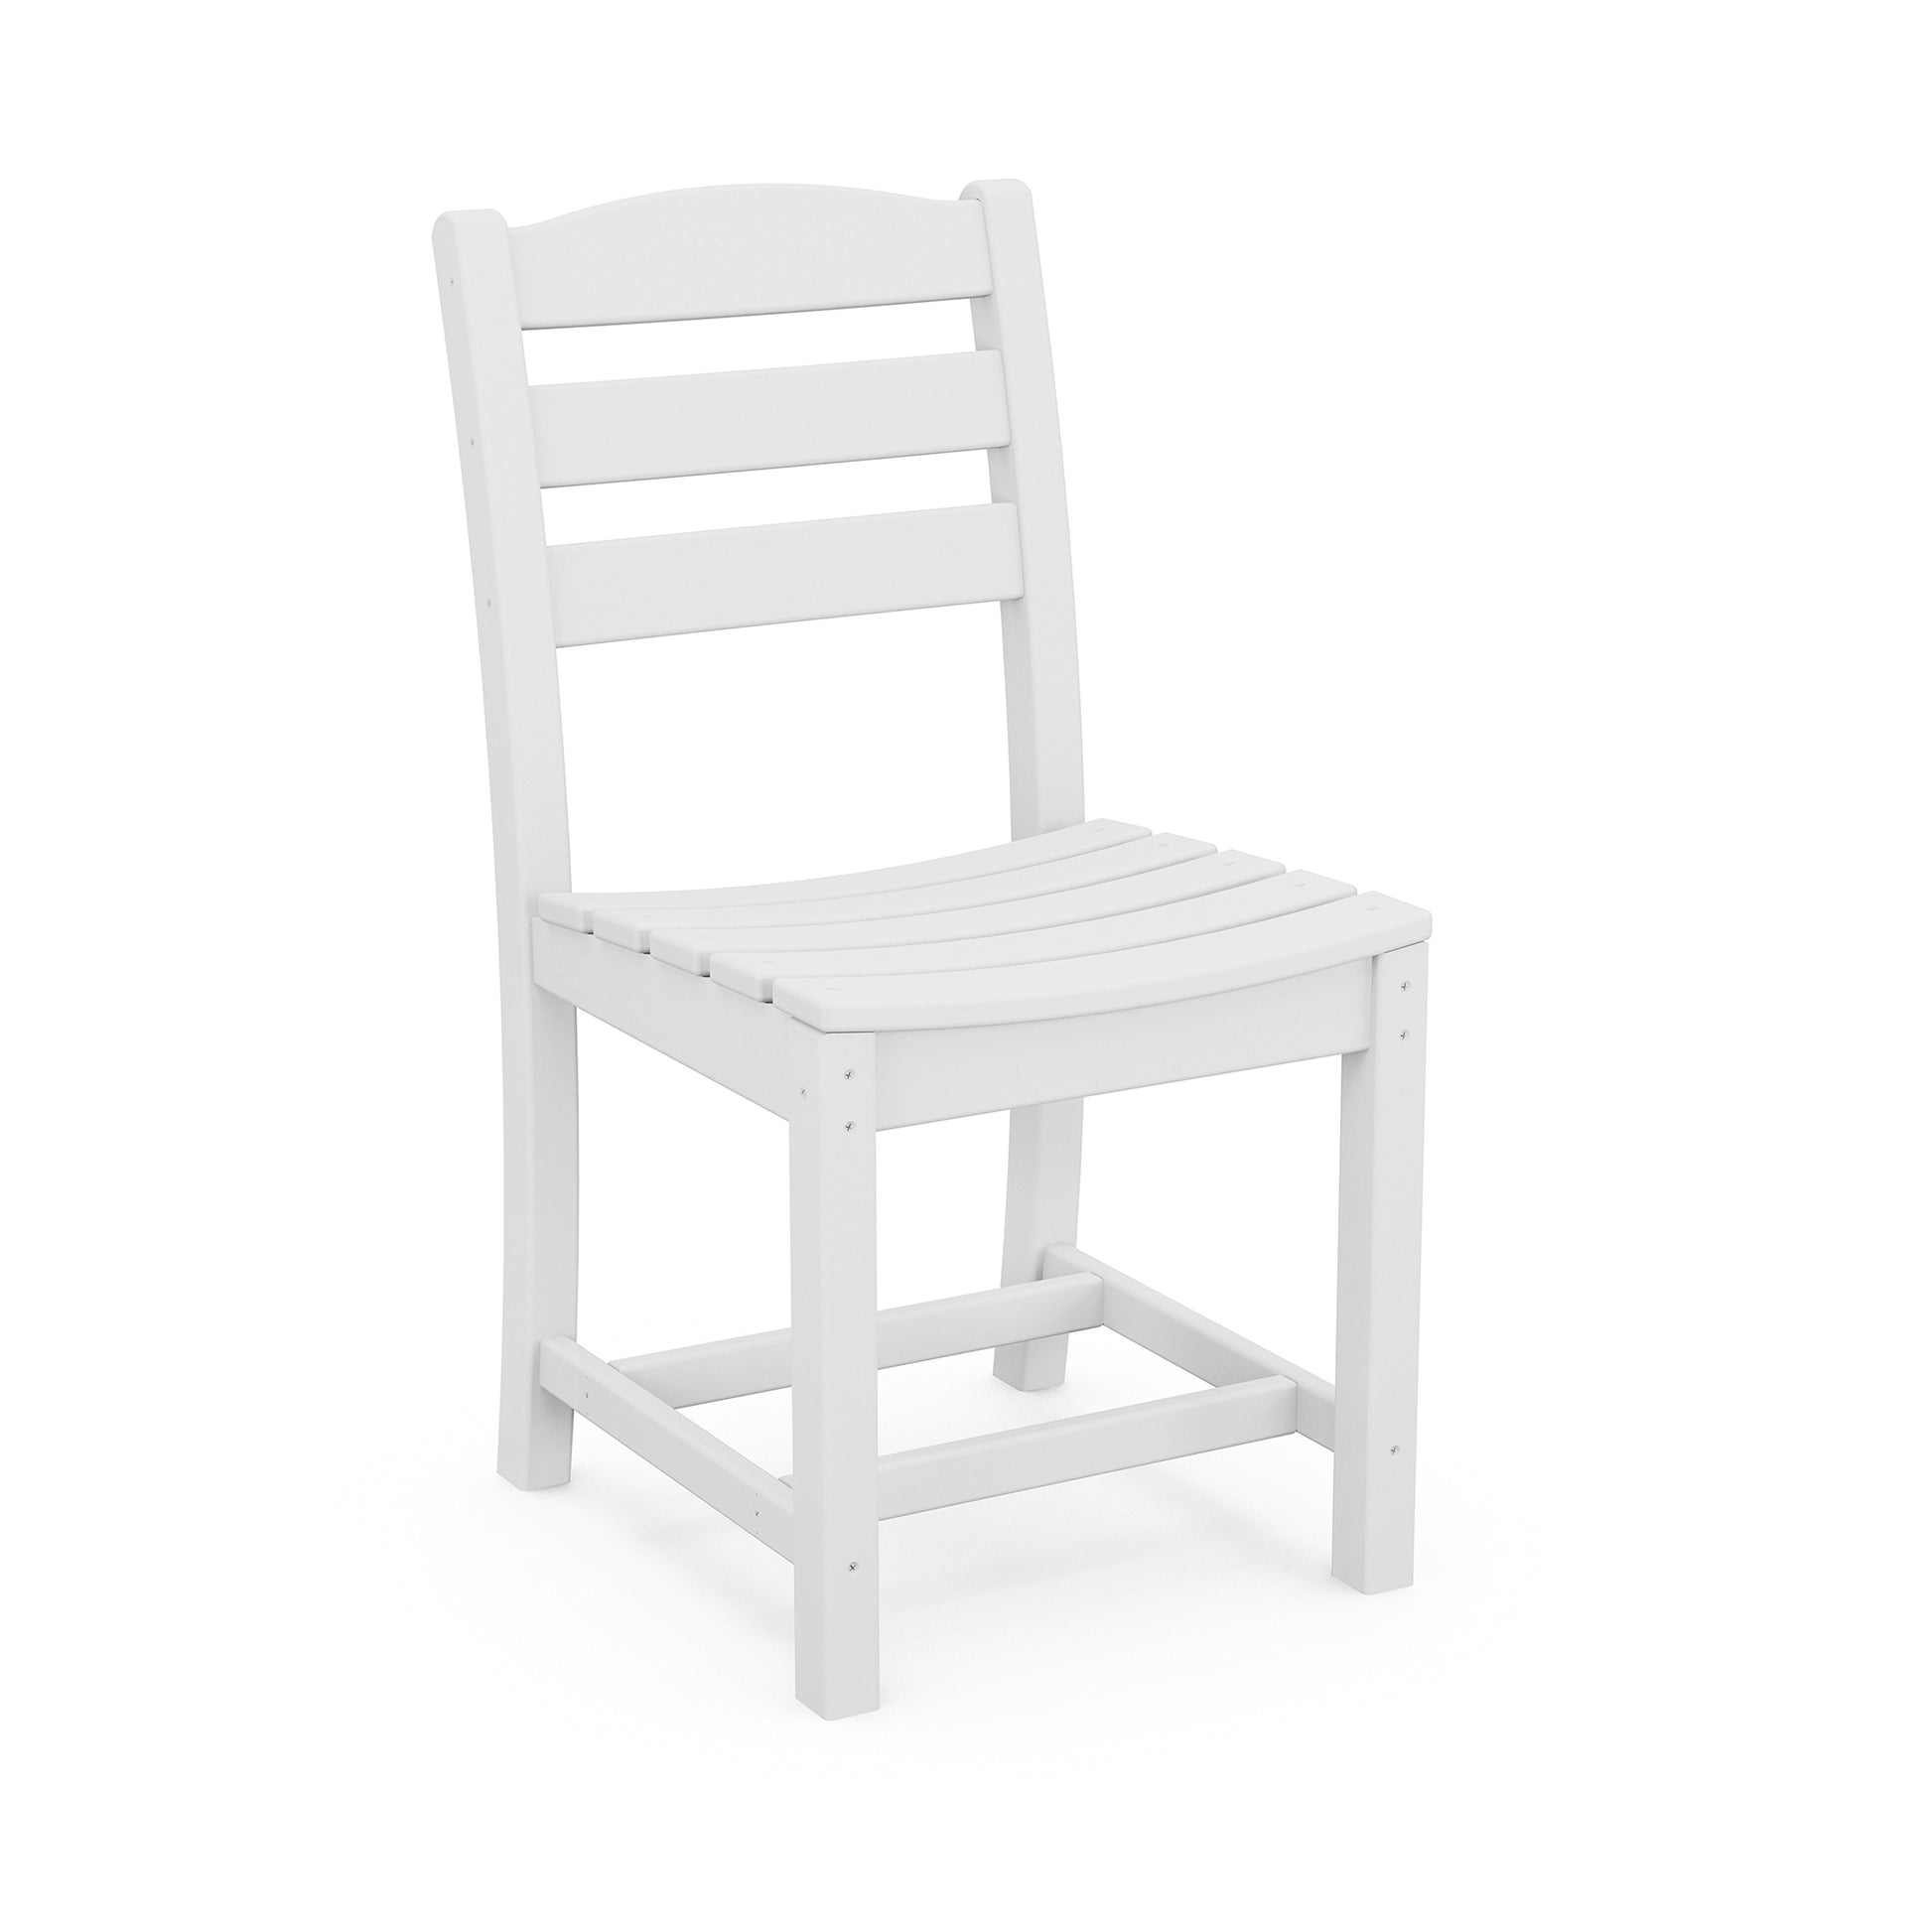 A white POLYWOOD La Casa Cafe Outdoor Dining Side Chair with a slatted seat and a curved, slatted backrest, standing against a plain white background.